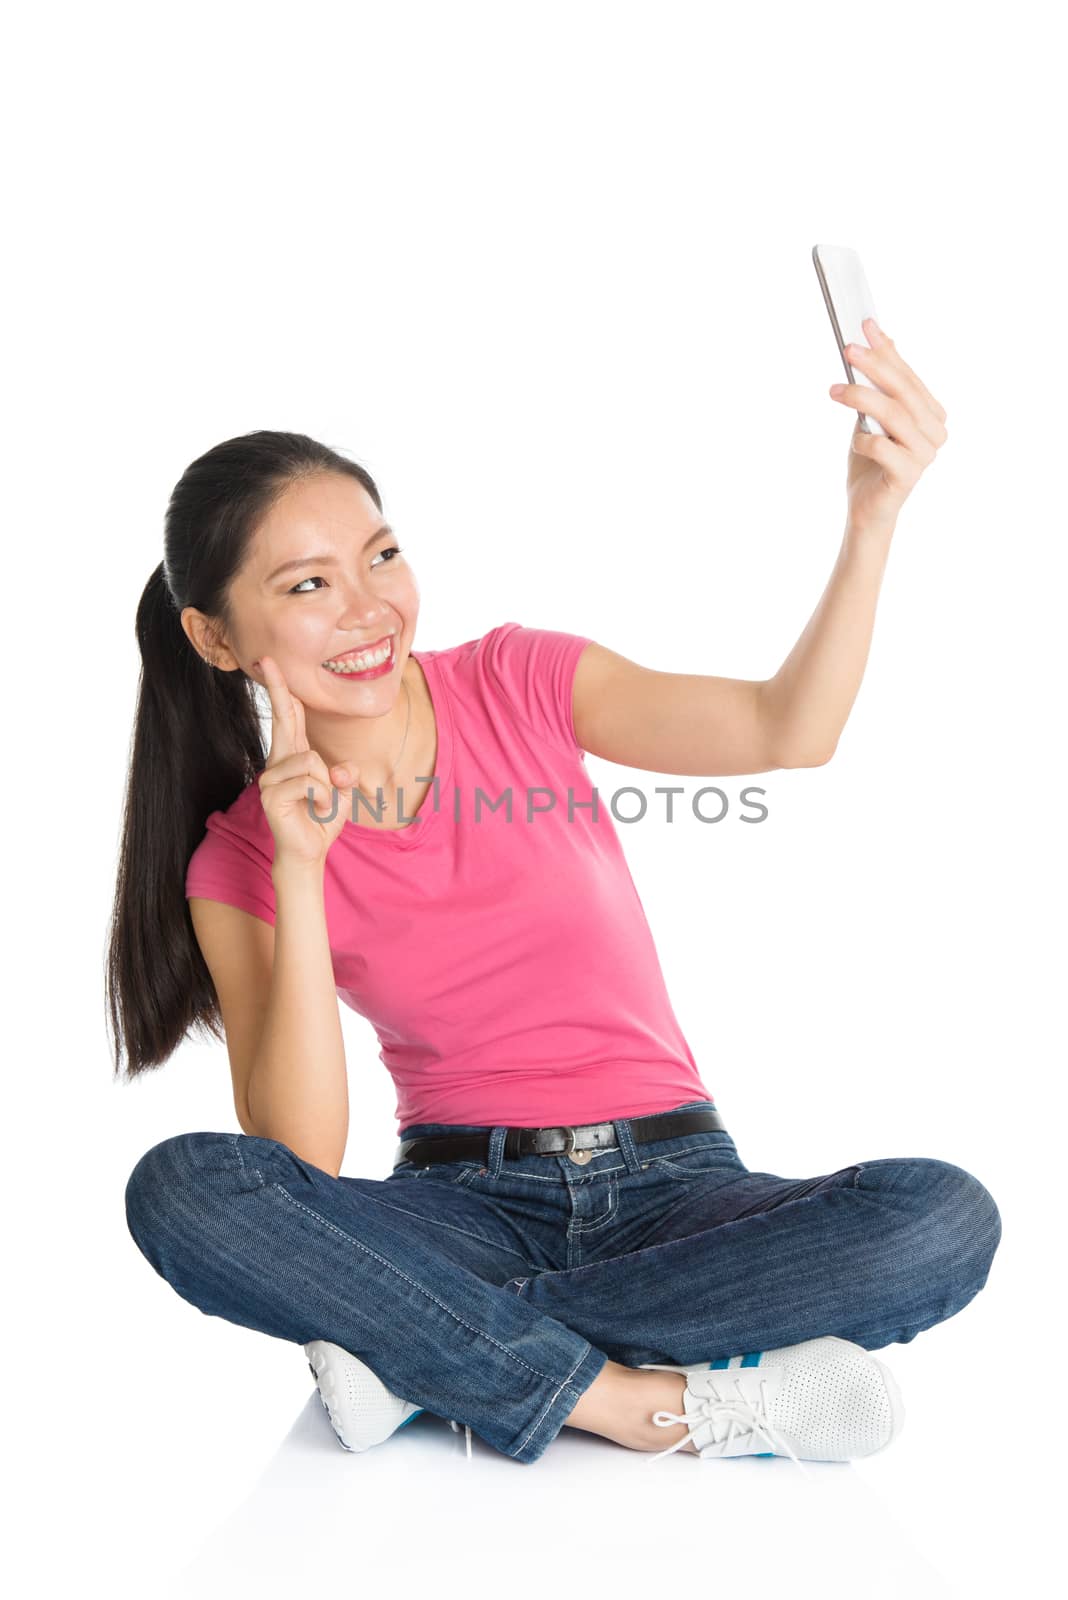 Full body young Asian girl in pink shirt taking self photo or selfie with smartphone, seated on floor, full length isolated on white background.